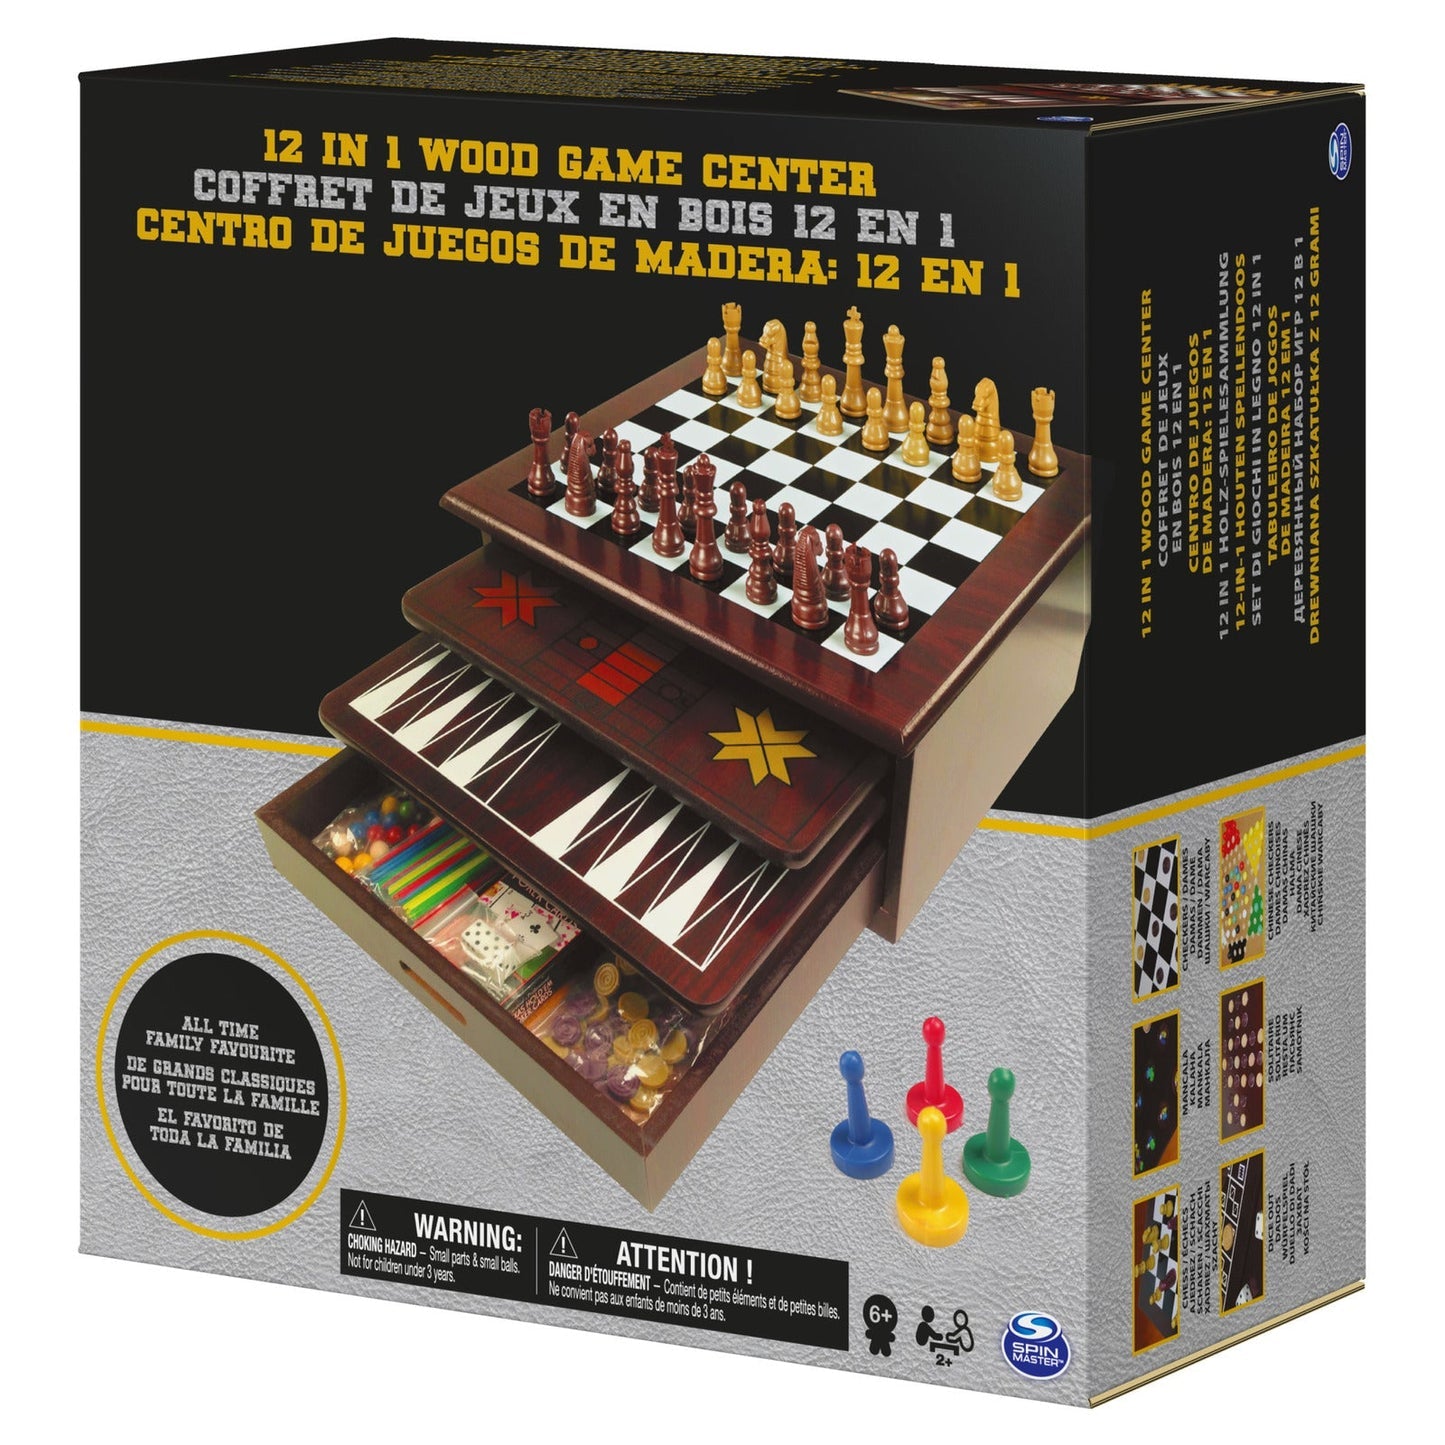 15-in-1 Wooden Game Center